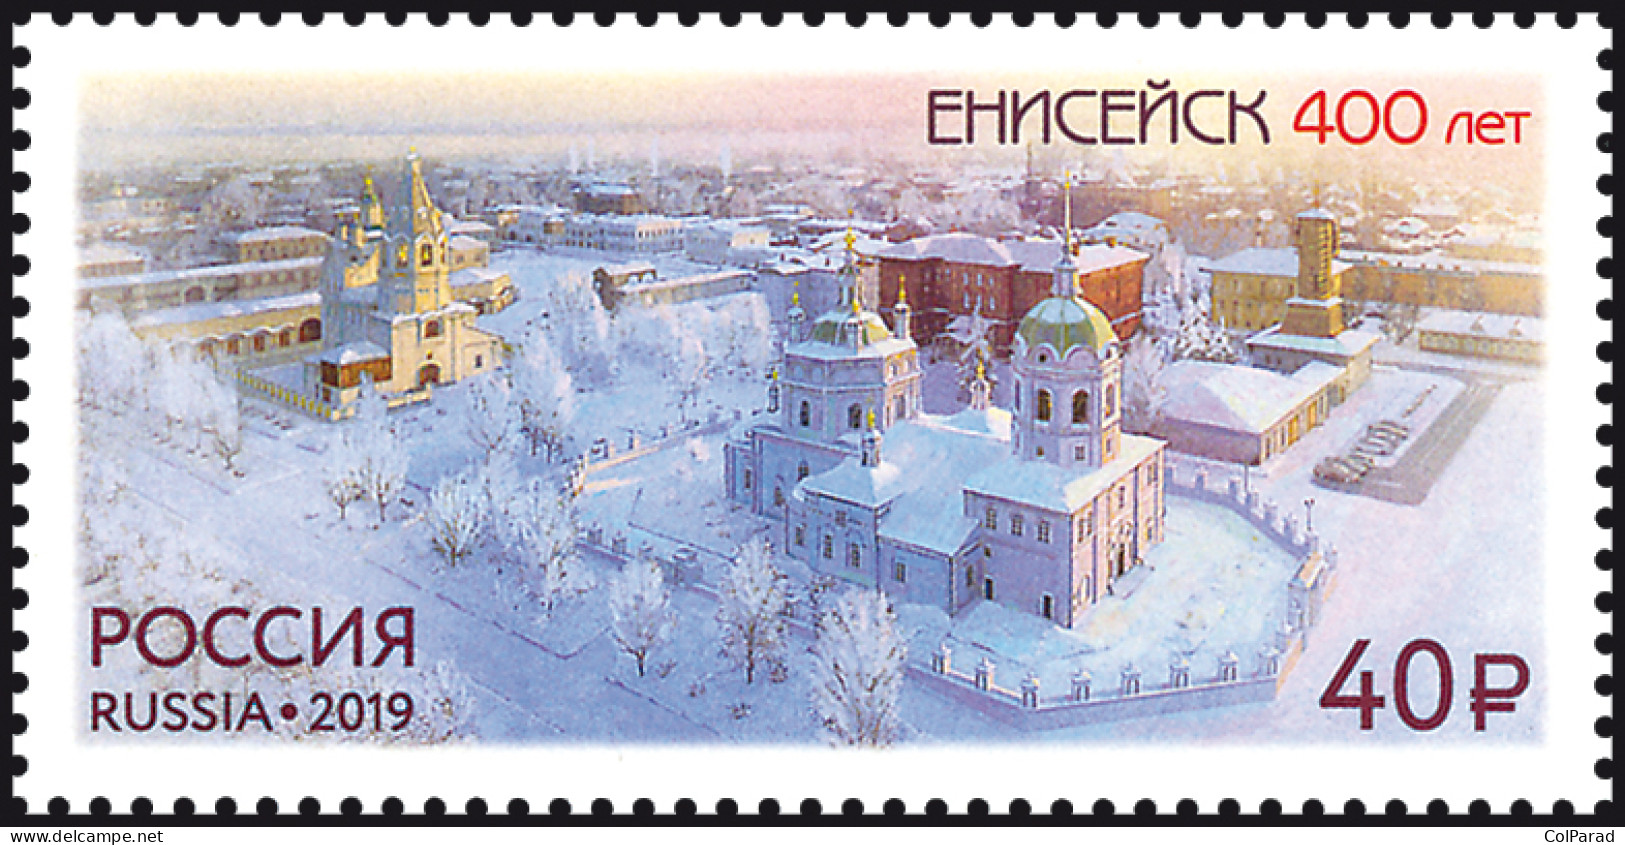 RUSSIA - 2019 -  STAMP MNH ** - 400th Anniversary Of The City Of Yeniseysk - Nuevos